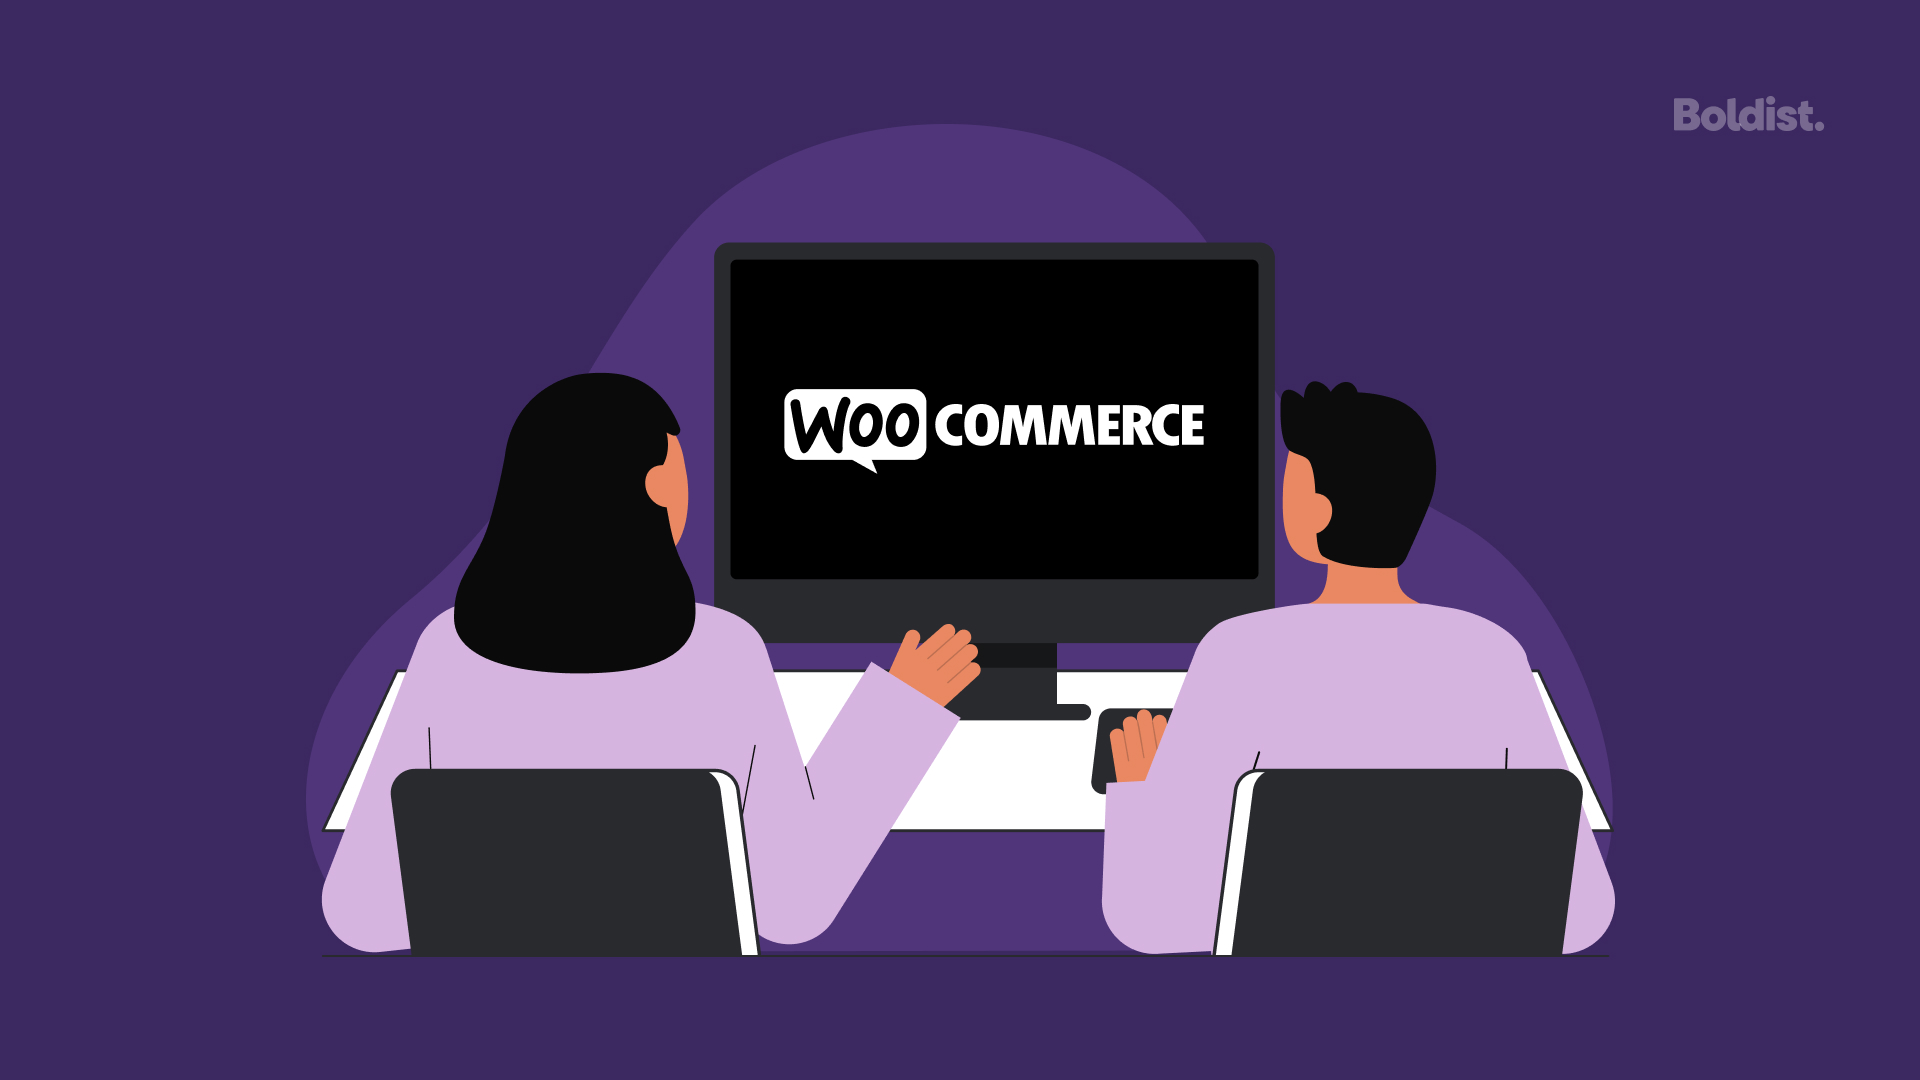 Boldist - WooCommerce 4.0 Released with sleek new interface design